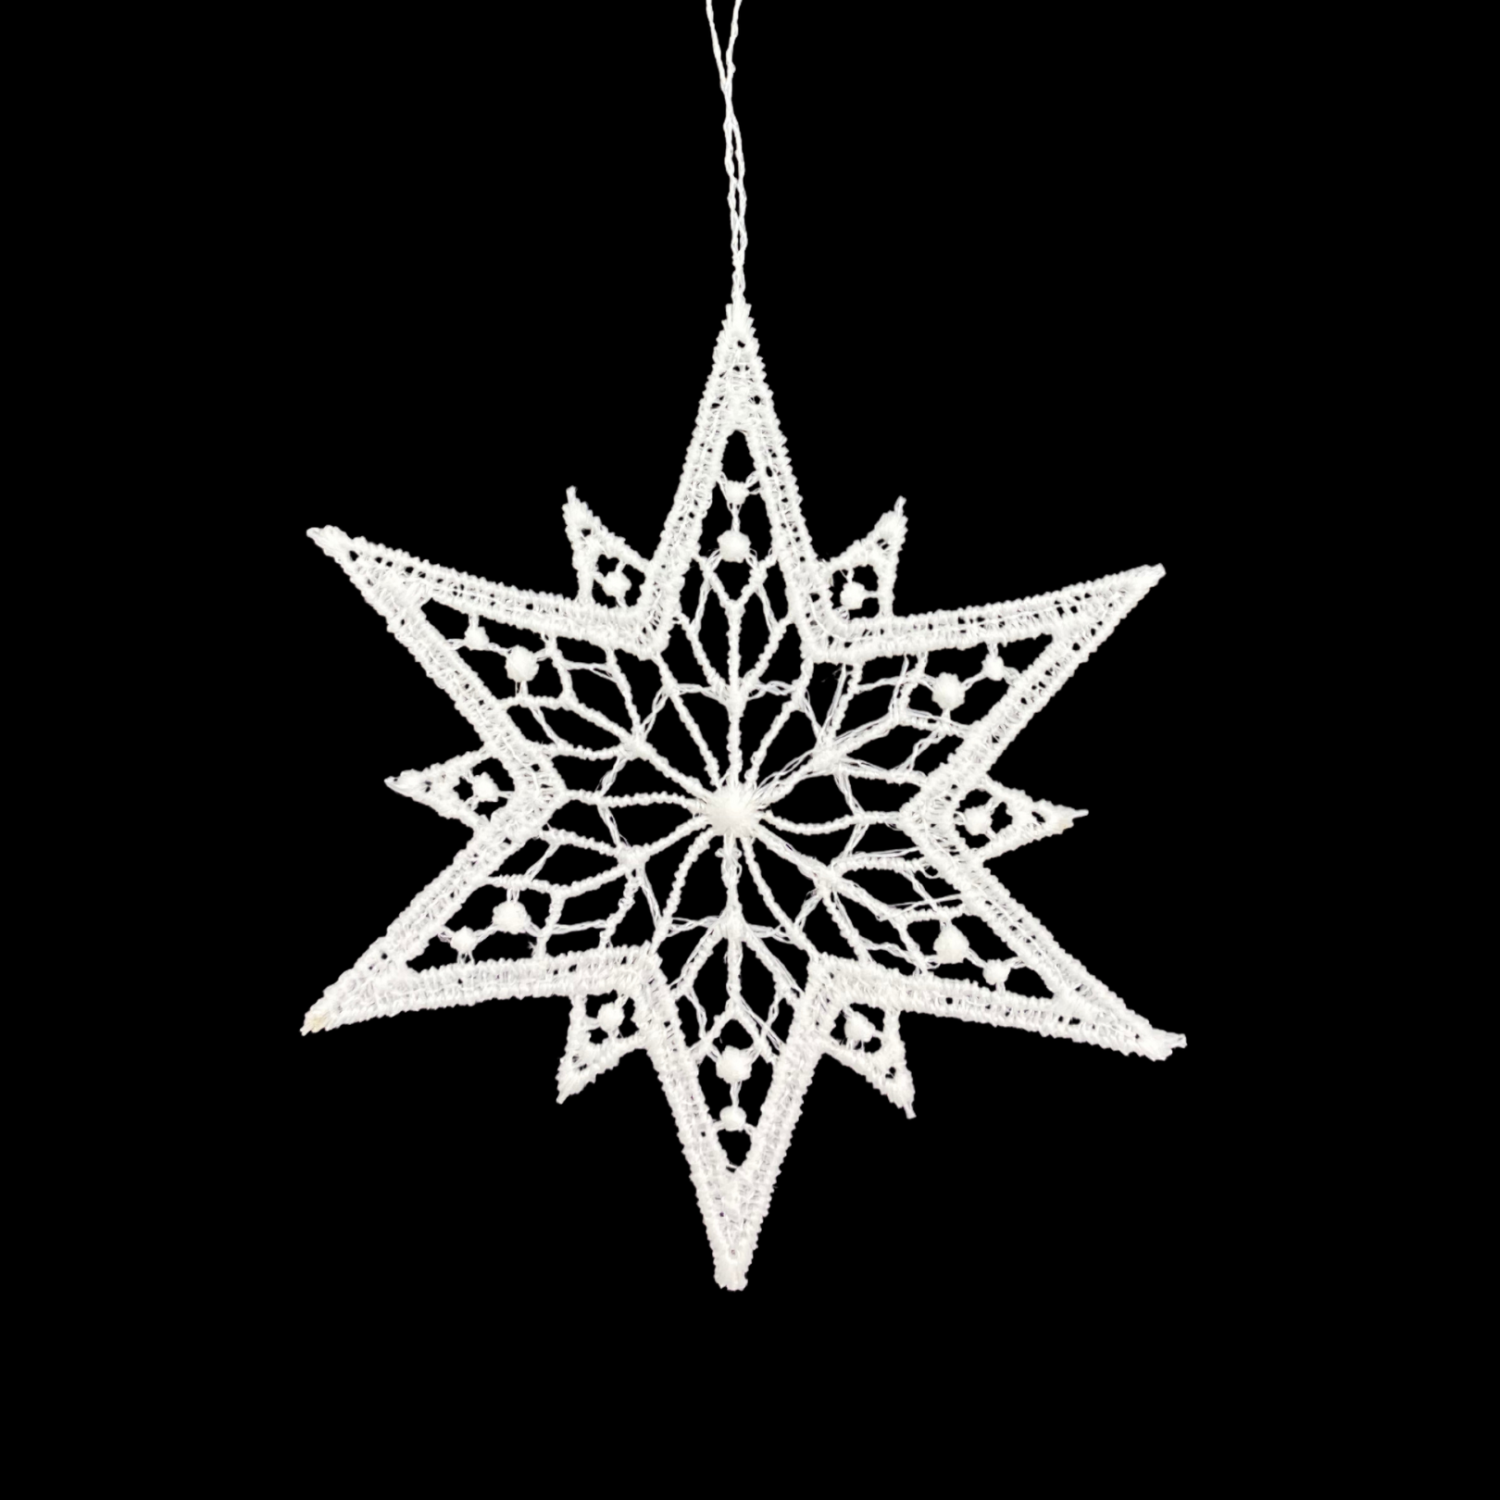 Lace Star #4 Ornament by StiVoTex Vogel